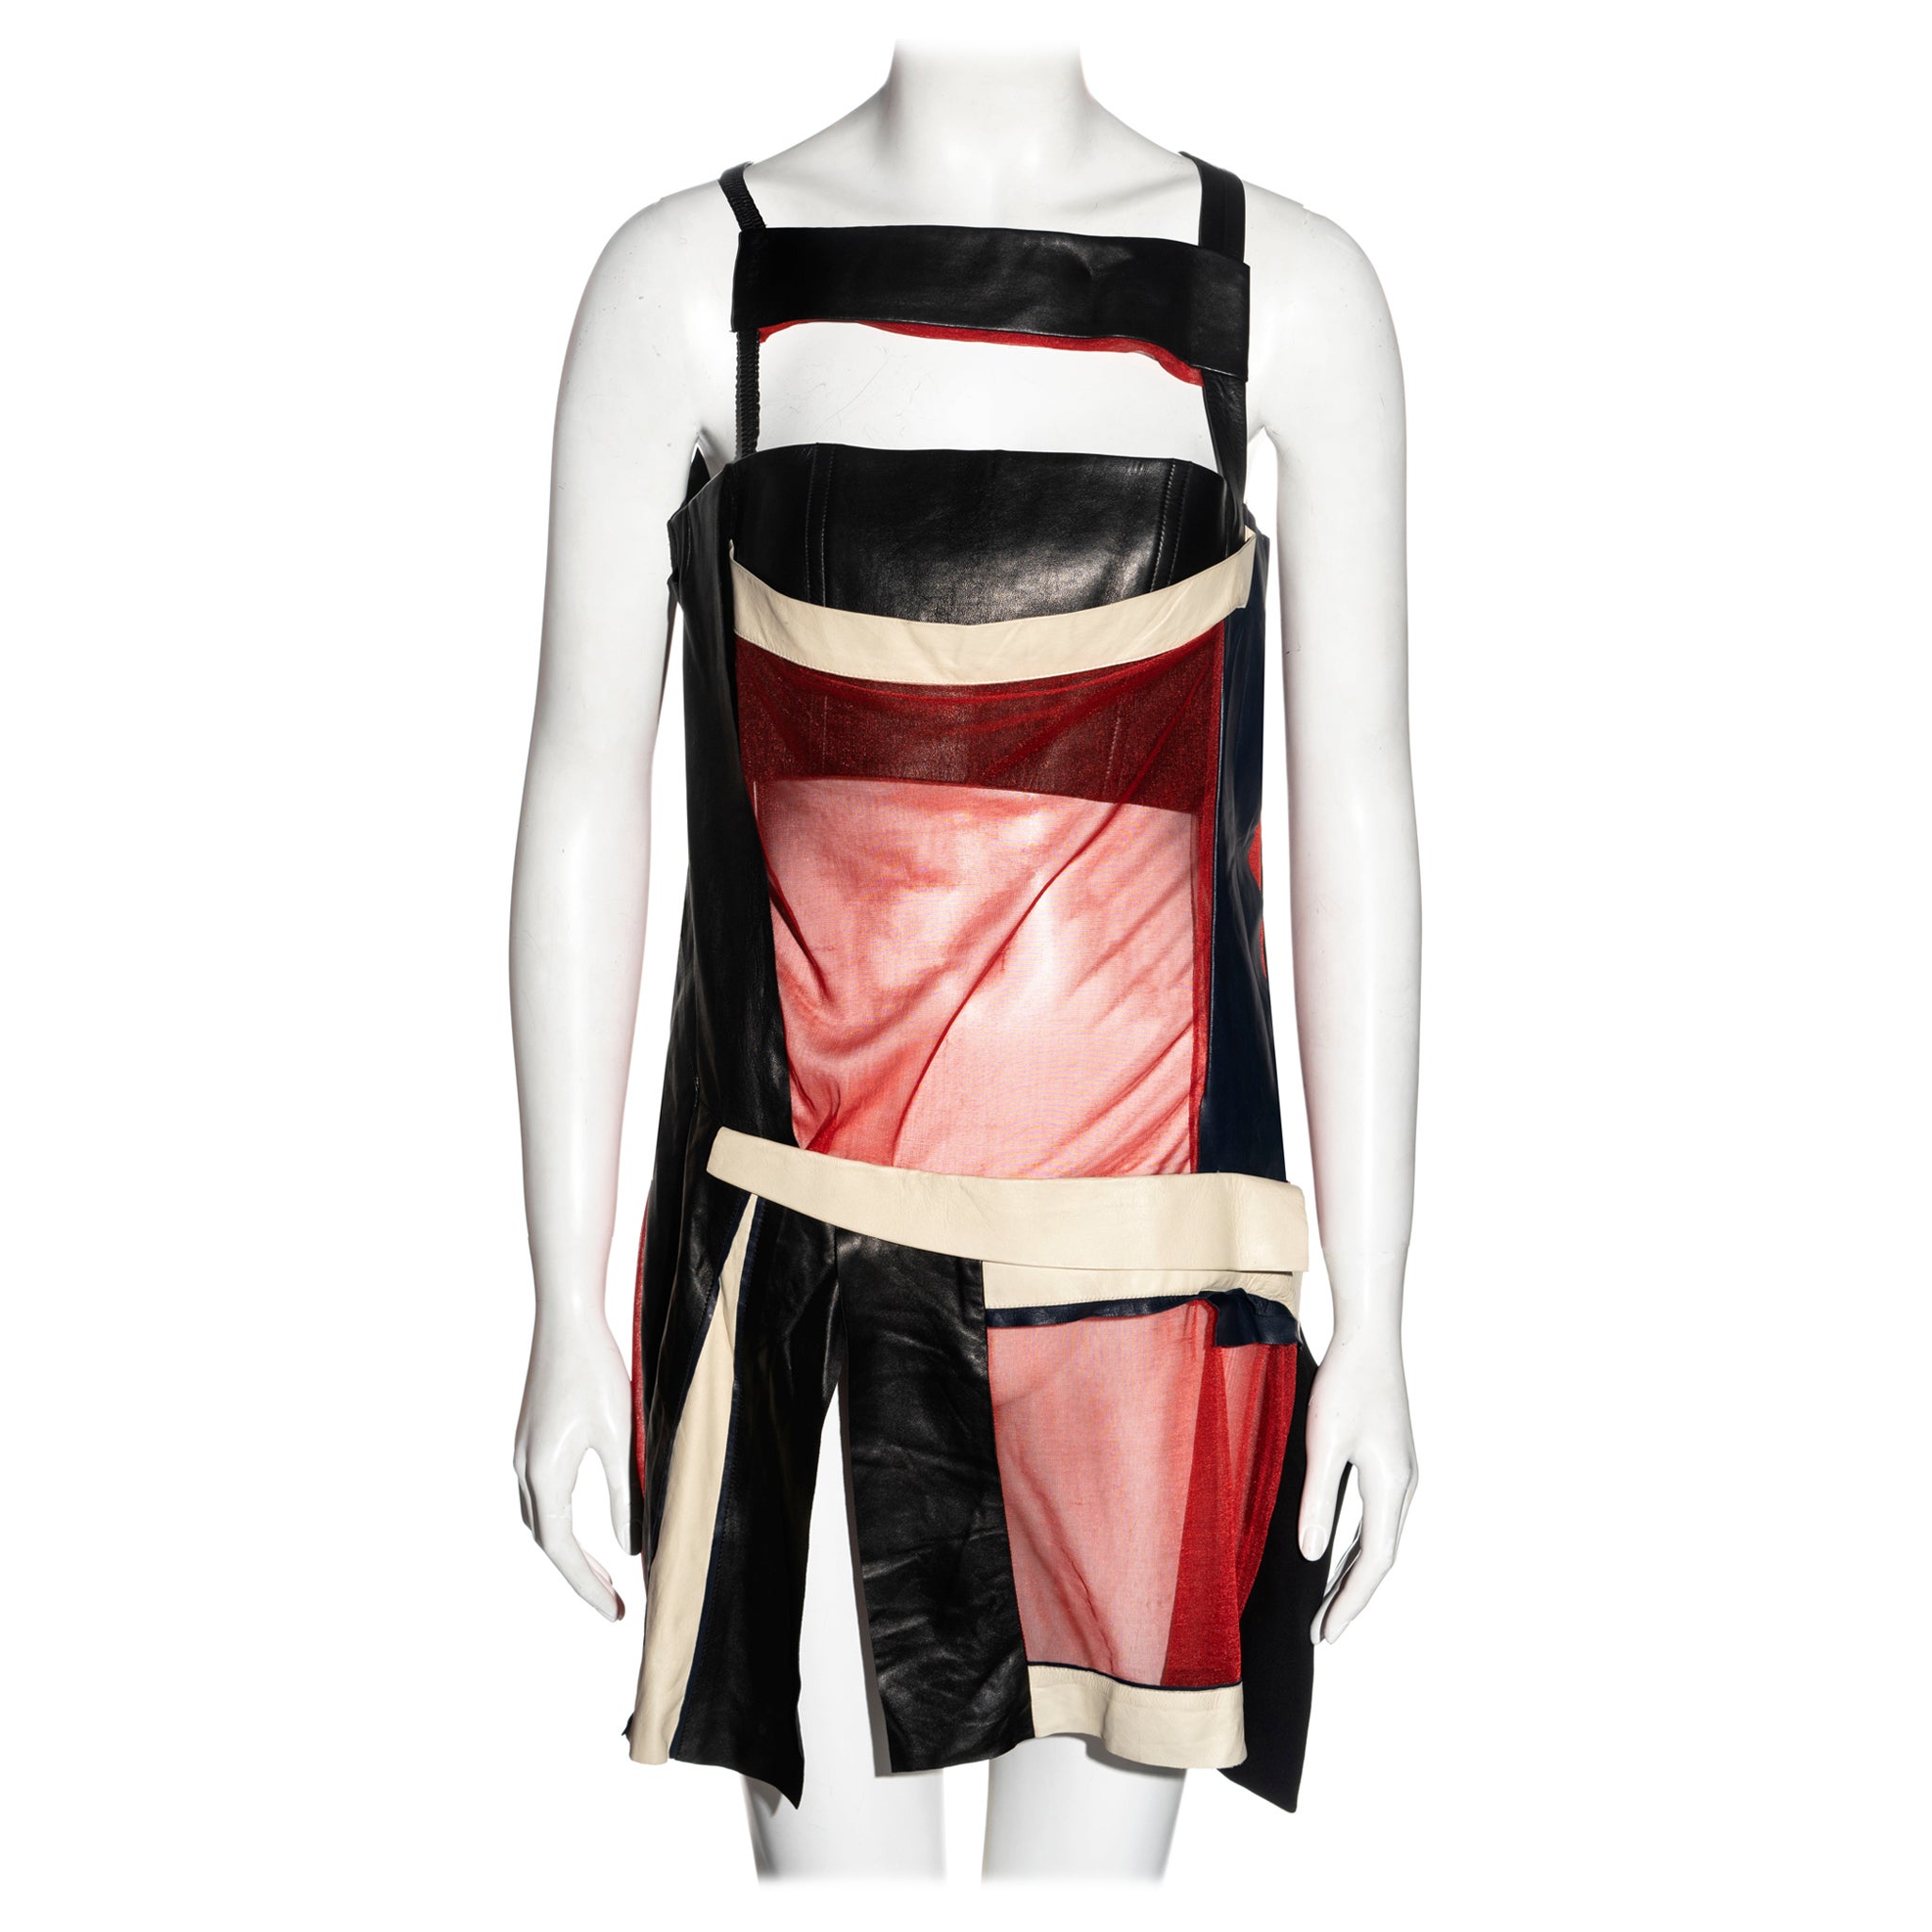 Balenciaga by Nicolas Ghesquière black and red leather mini dress, ss 2010